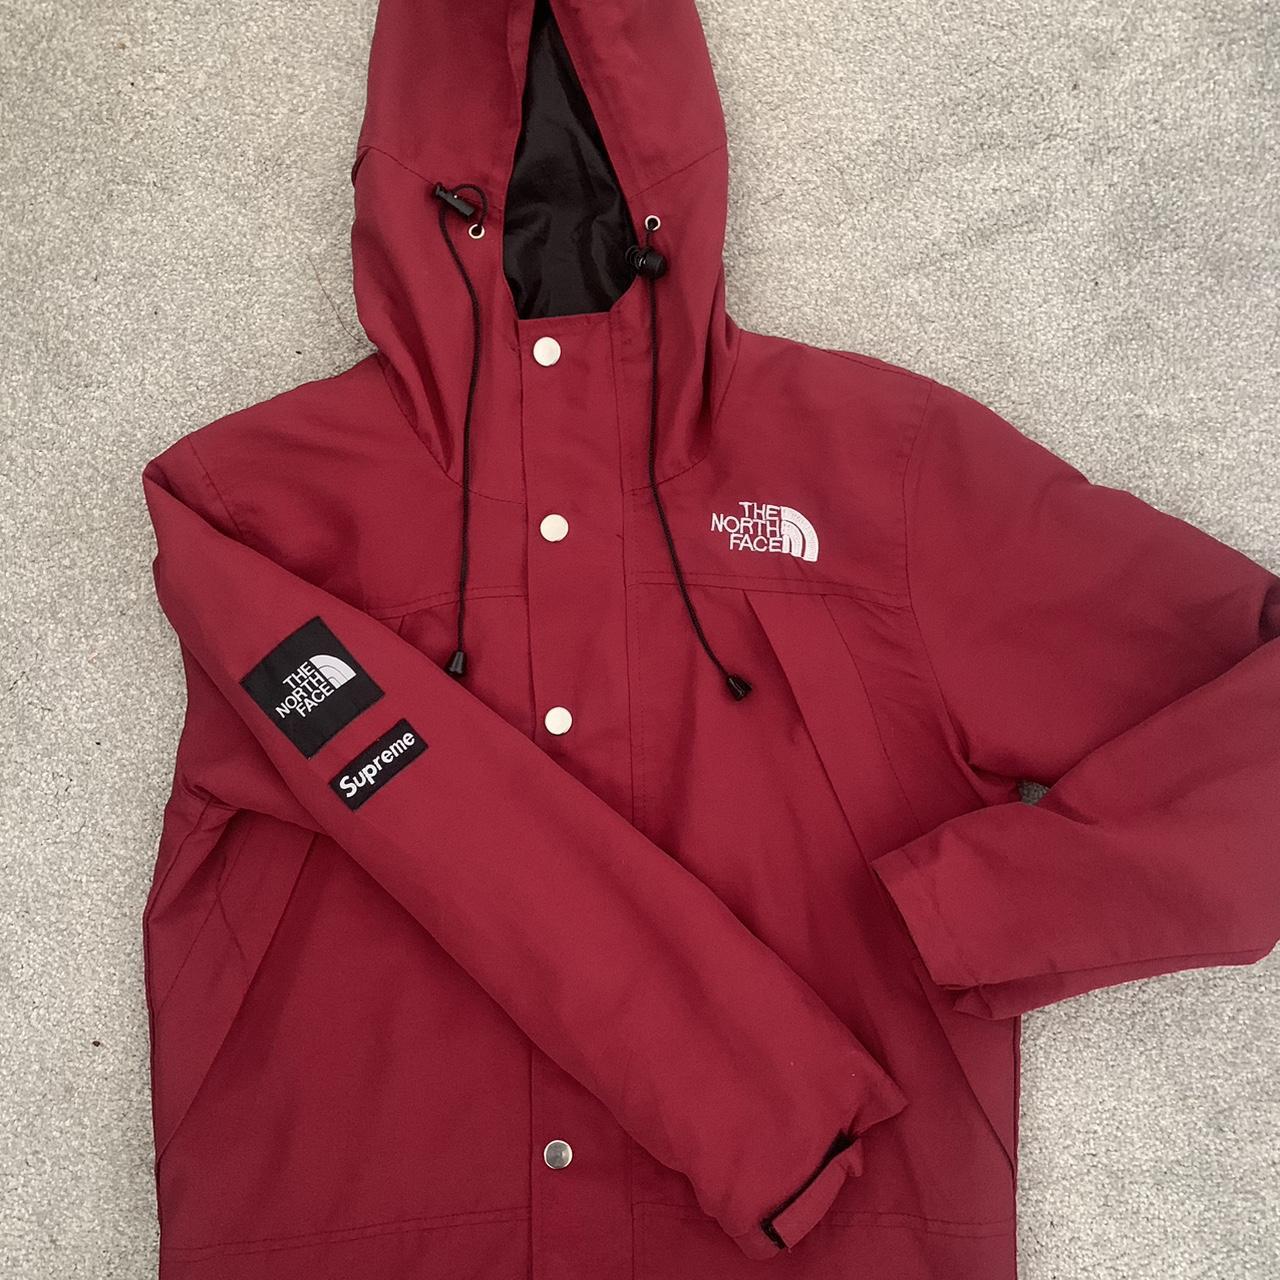 Supreme Women's Red and White Jacket | Depop